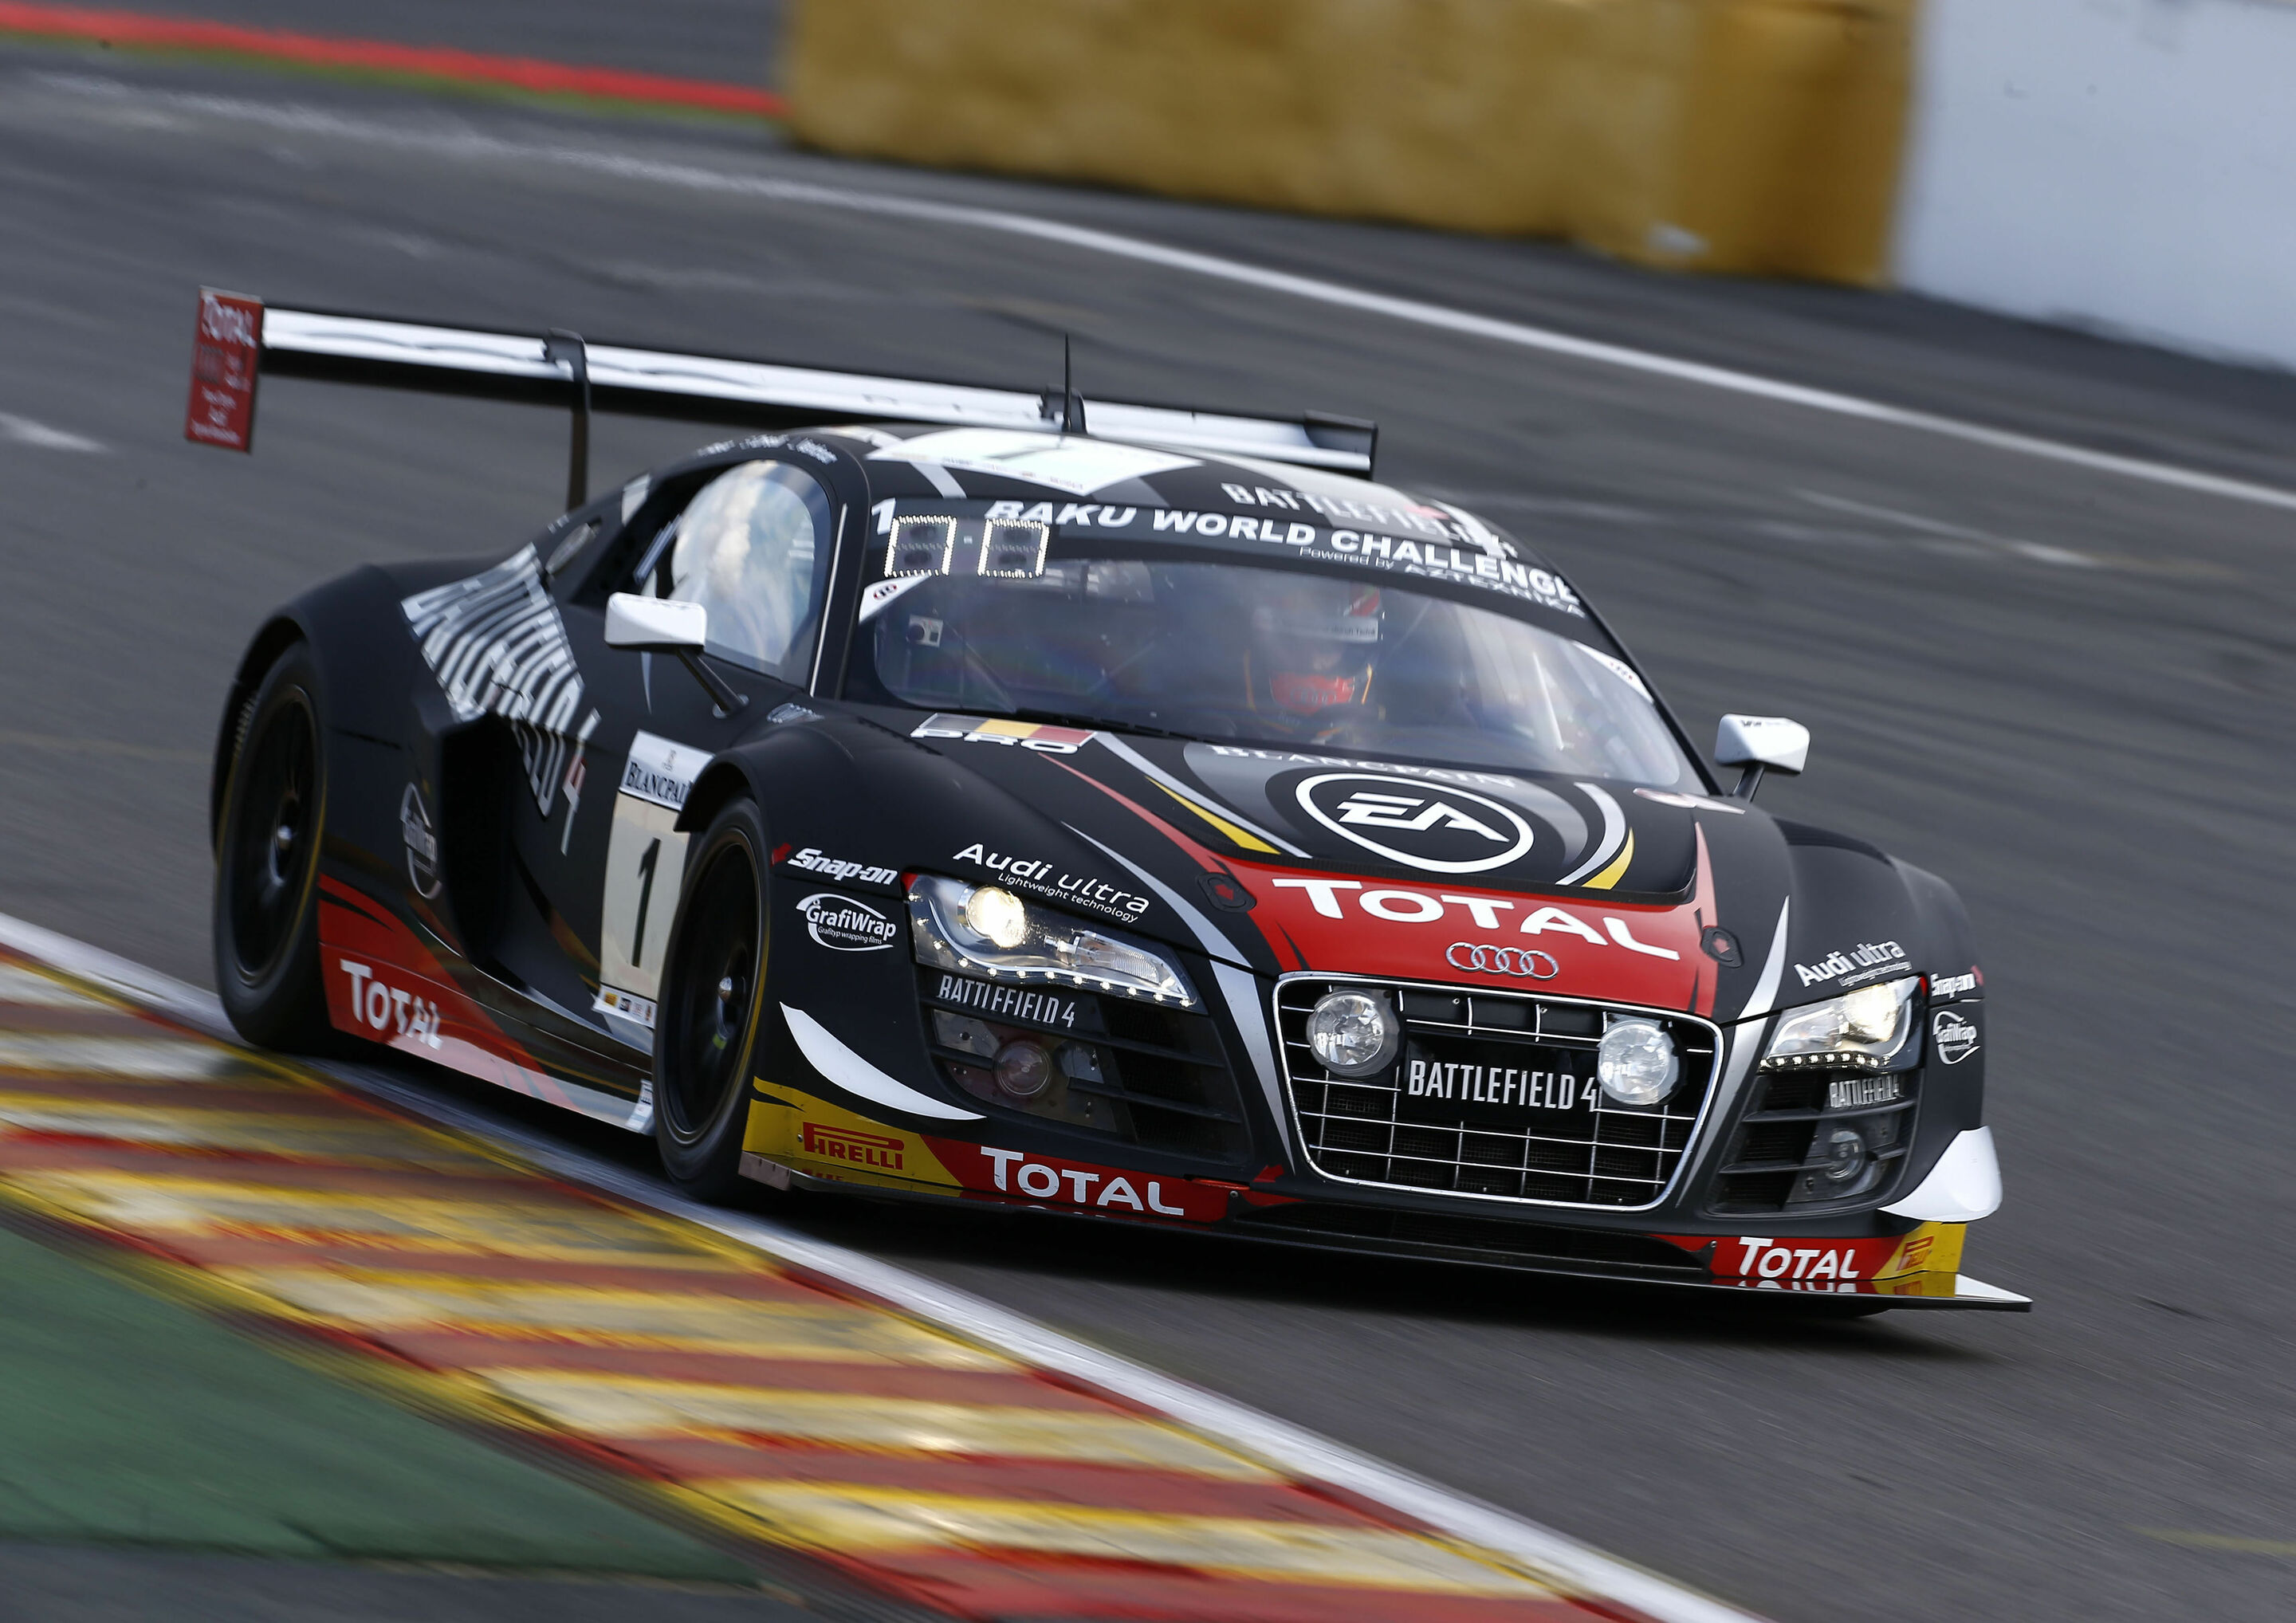 Best Audi customer on grid position 20 at Spa